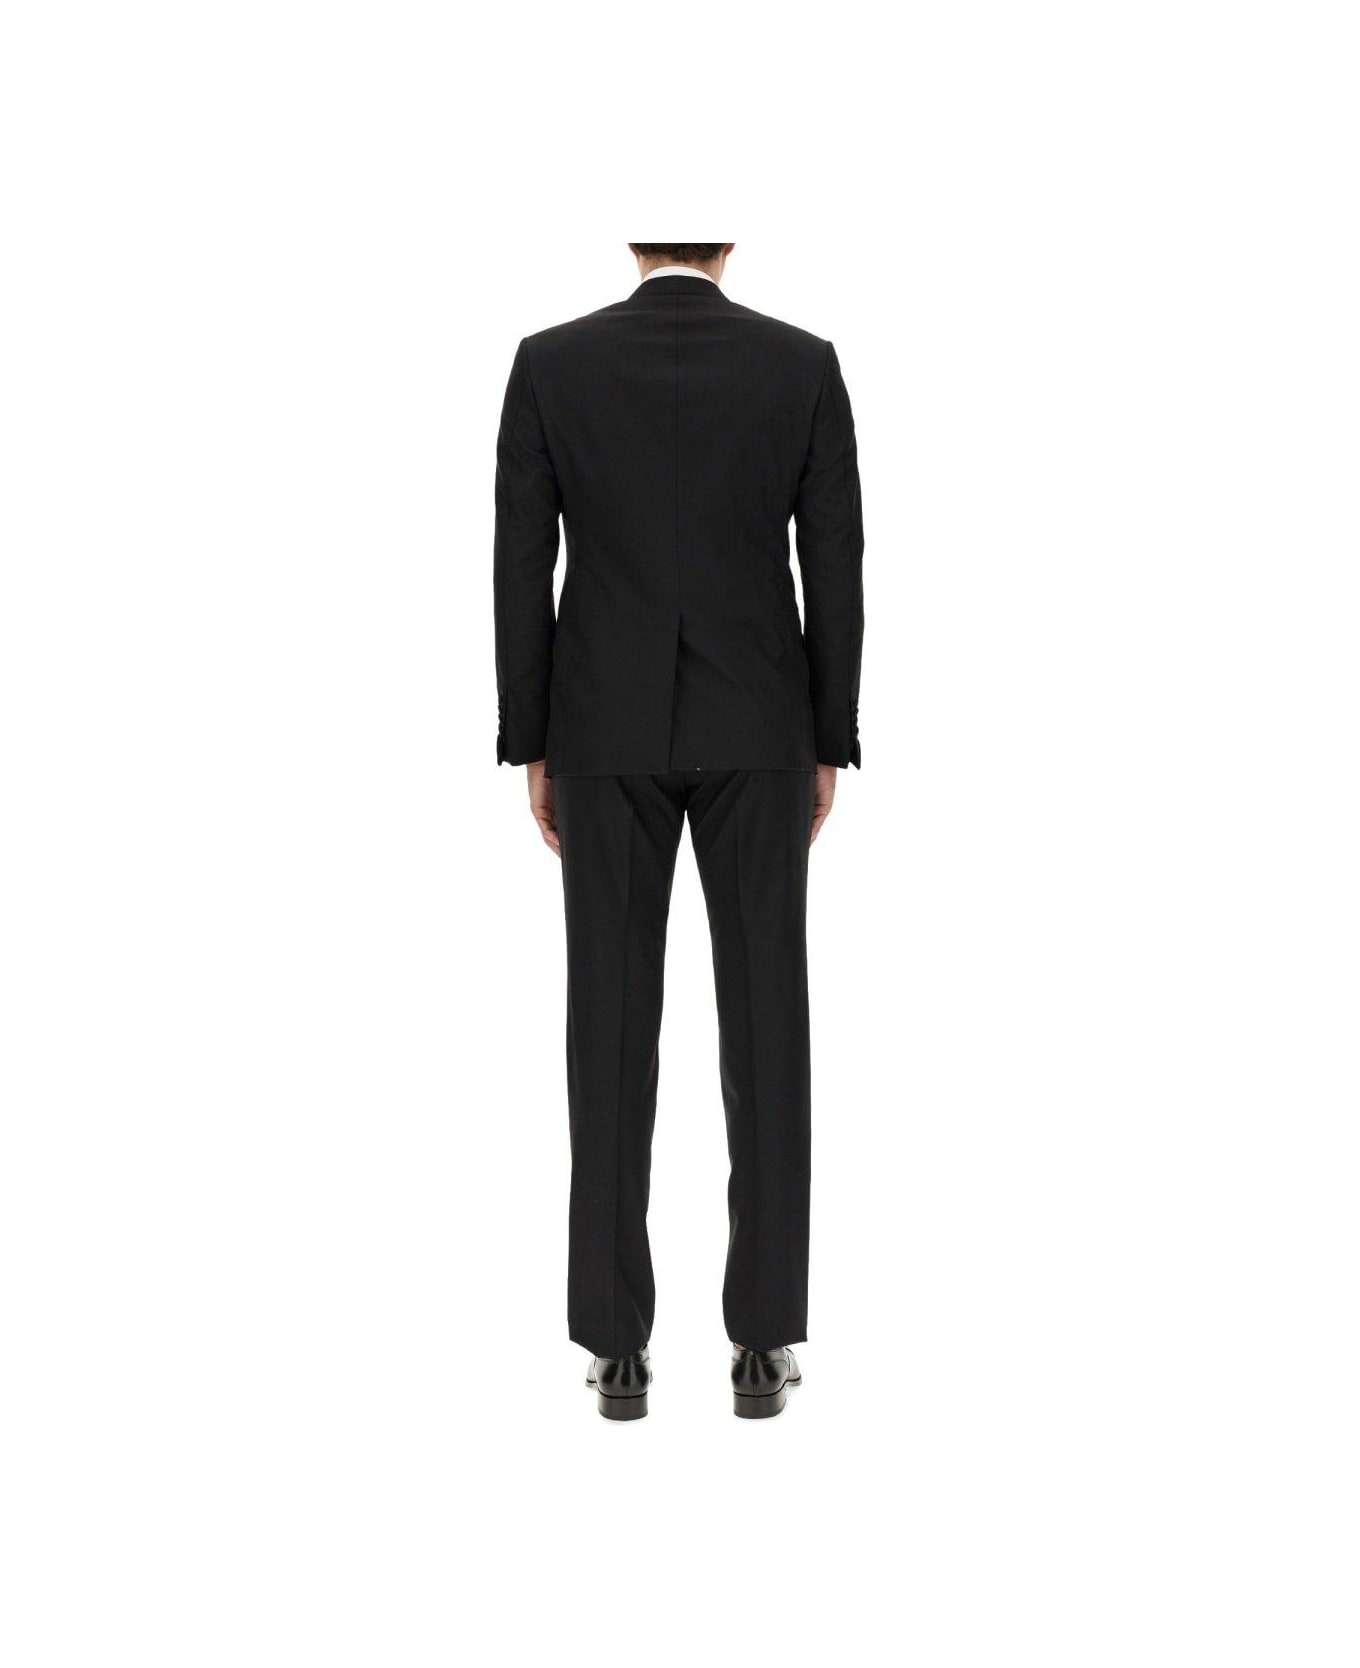 Tom Ford Single-breasted Two-piece Tailored Suit - BLACK スーツ